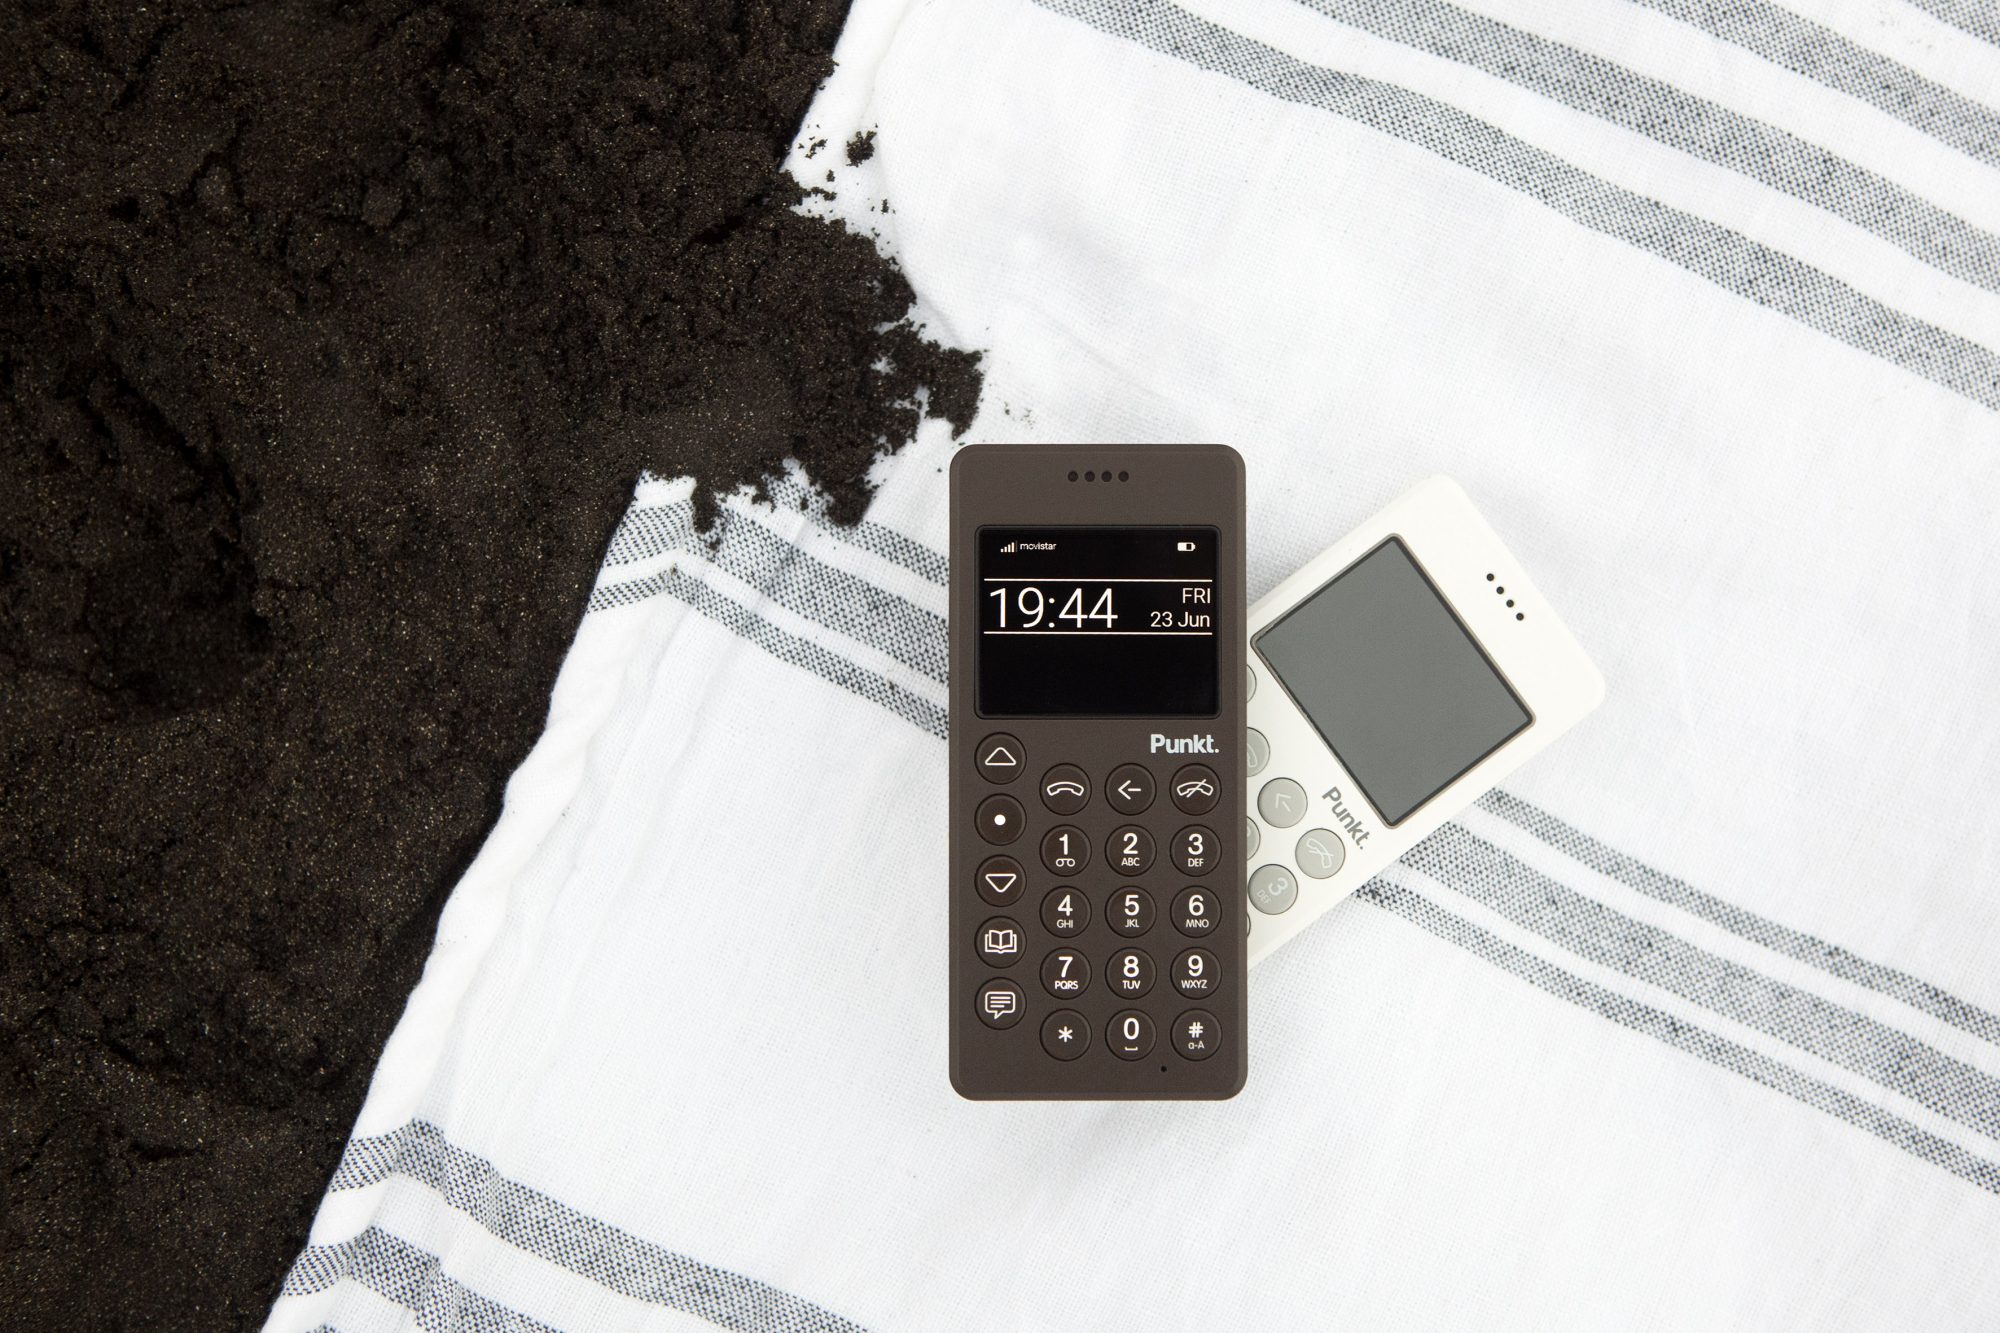 Take the Punkt MP o1 on holiday and leave your smartphone at home